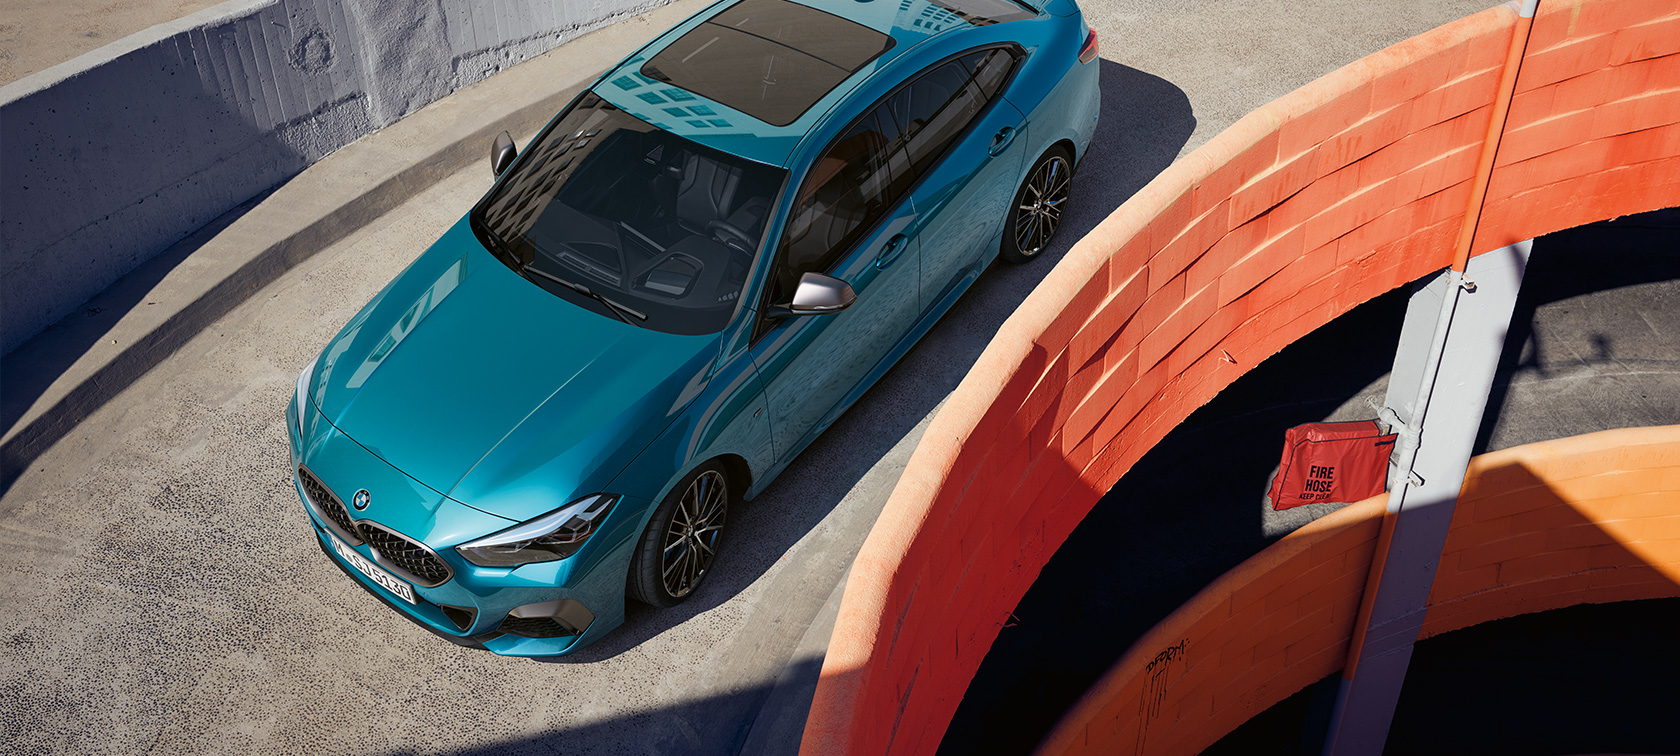 BMW 2 Series Gran Coupé F44 Snapper Rocks Blue metallic, three-quarter front view from above on the roof